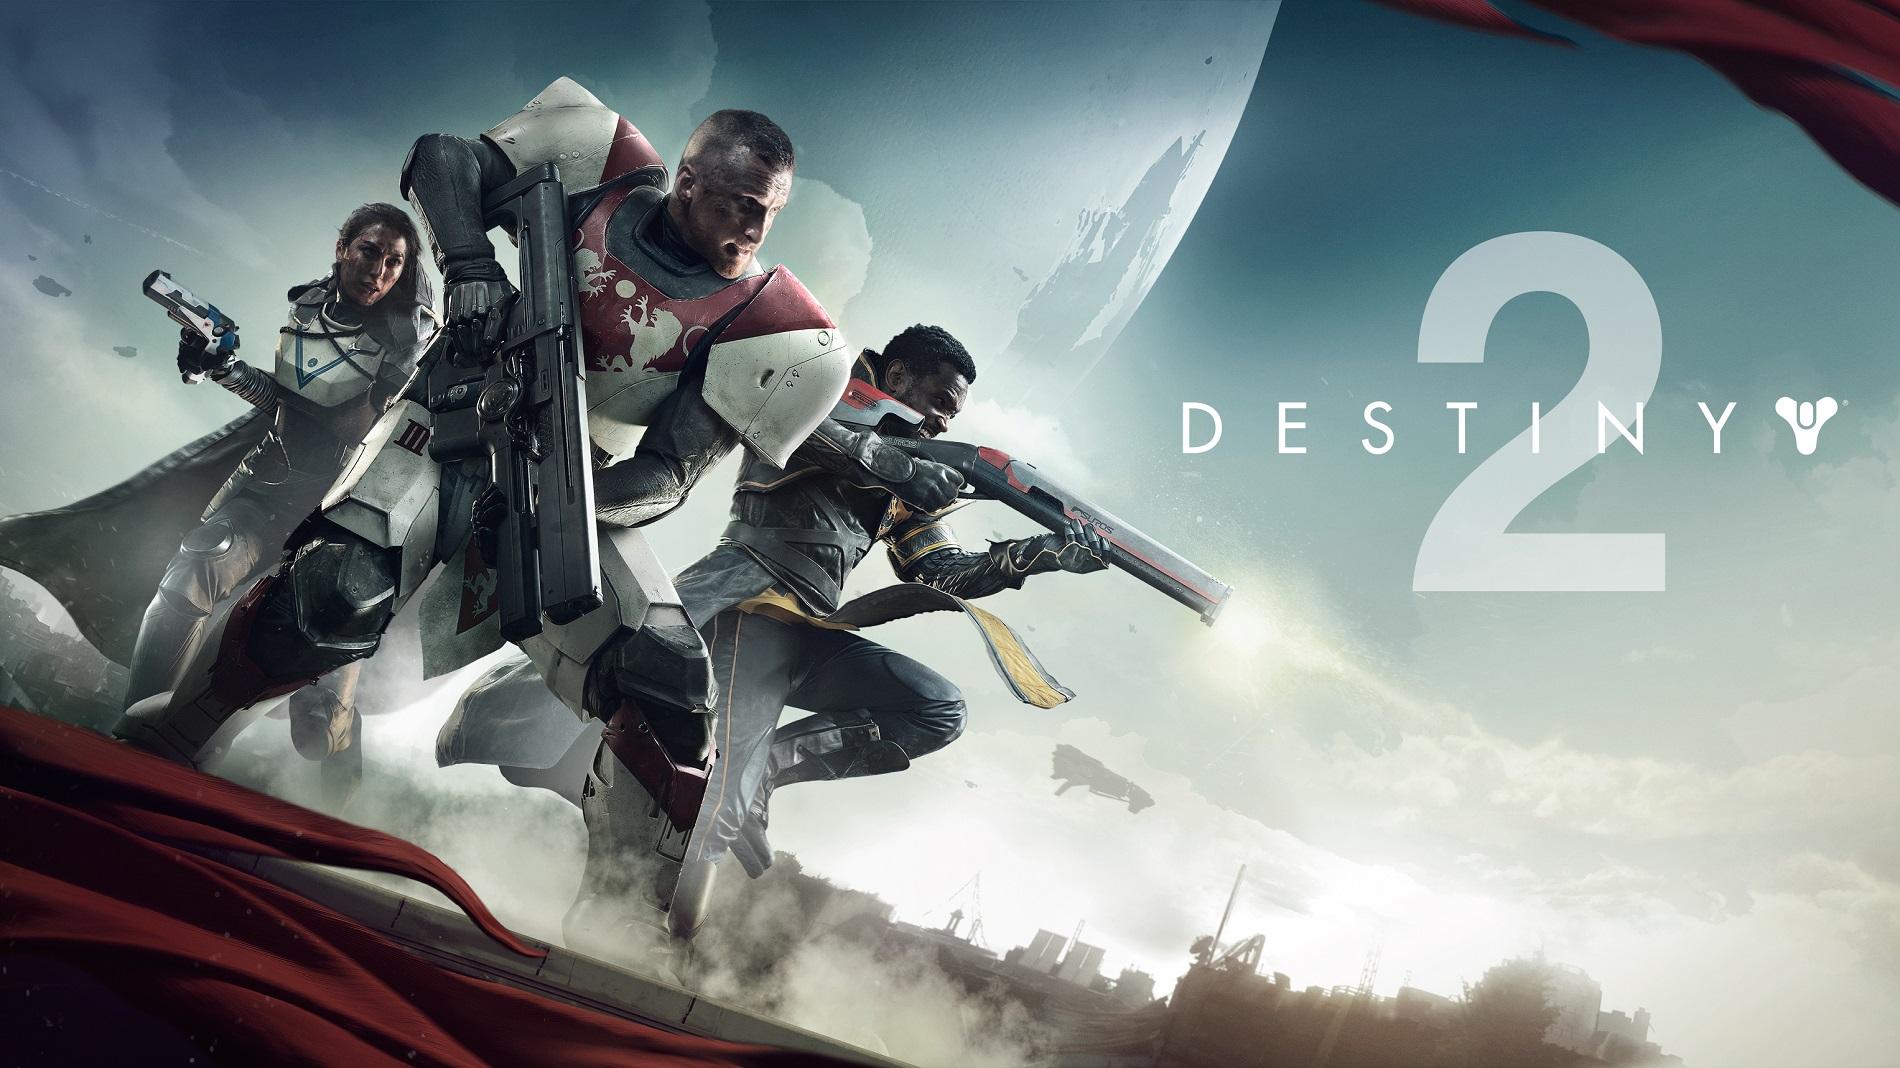 A review of the game Destiny 2: the biggest shooter gets even better